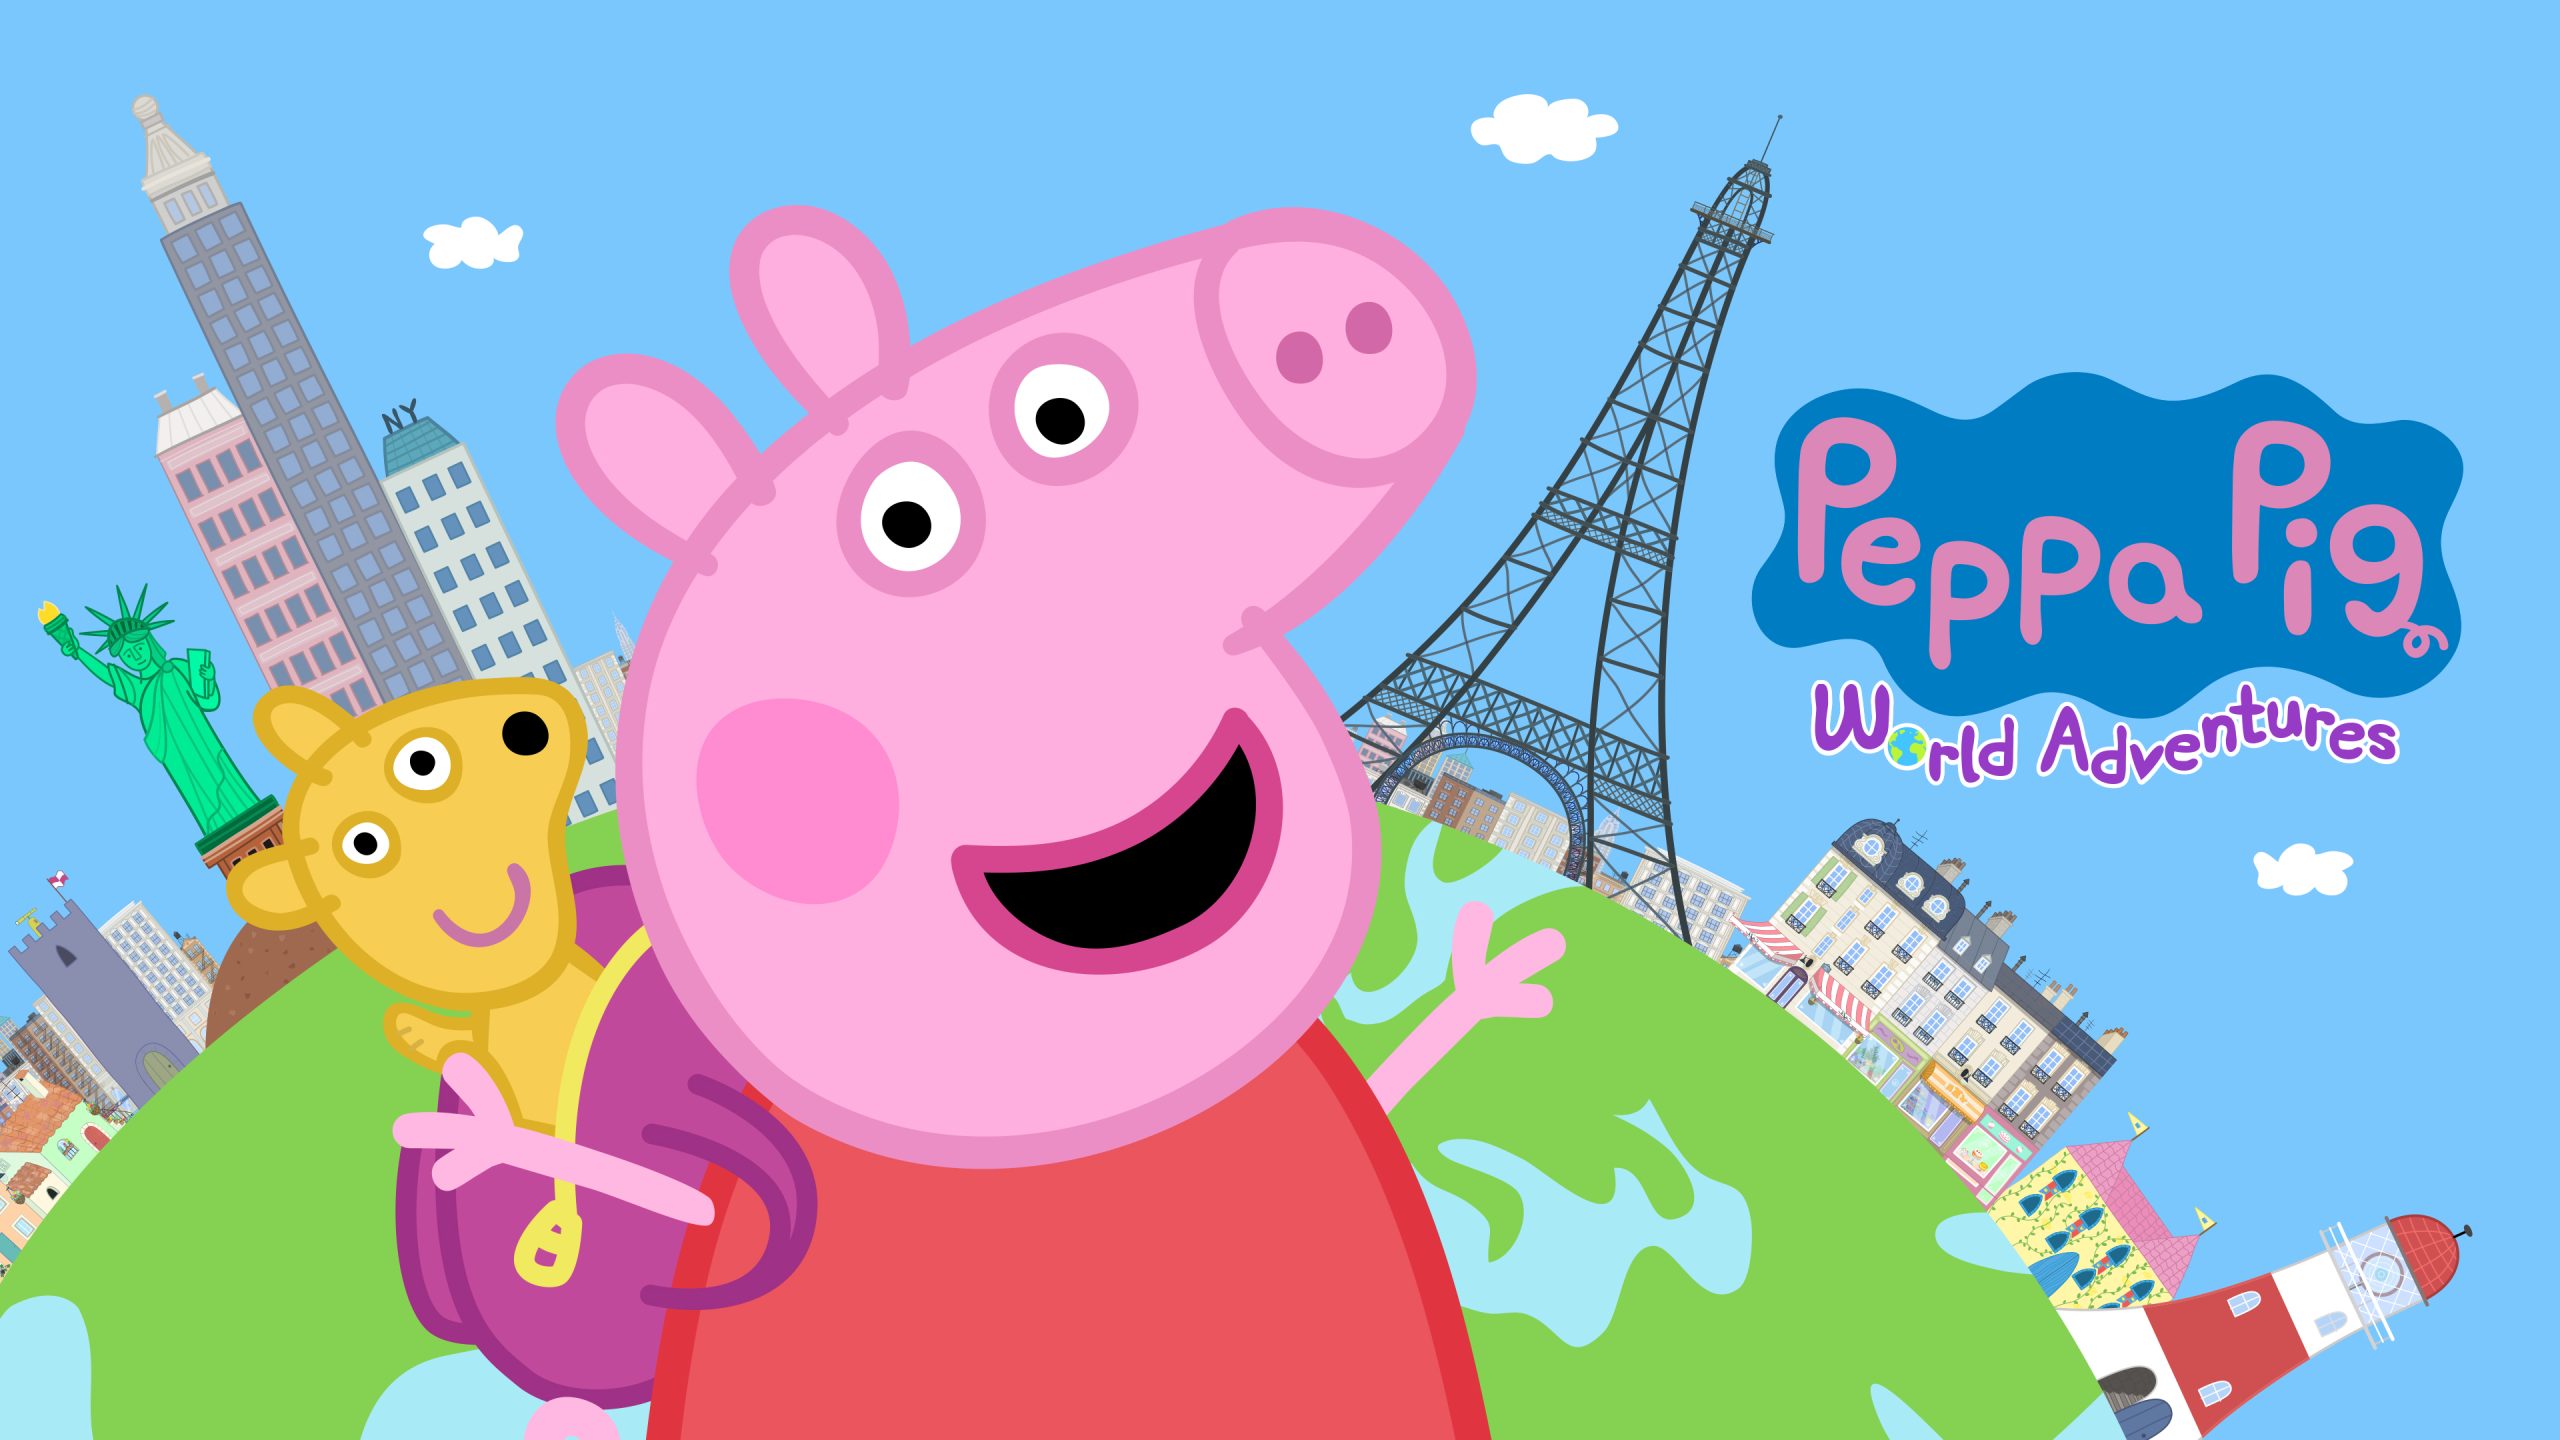 Peppa pig heads off on some world adventures in march release date confirmed